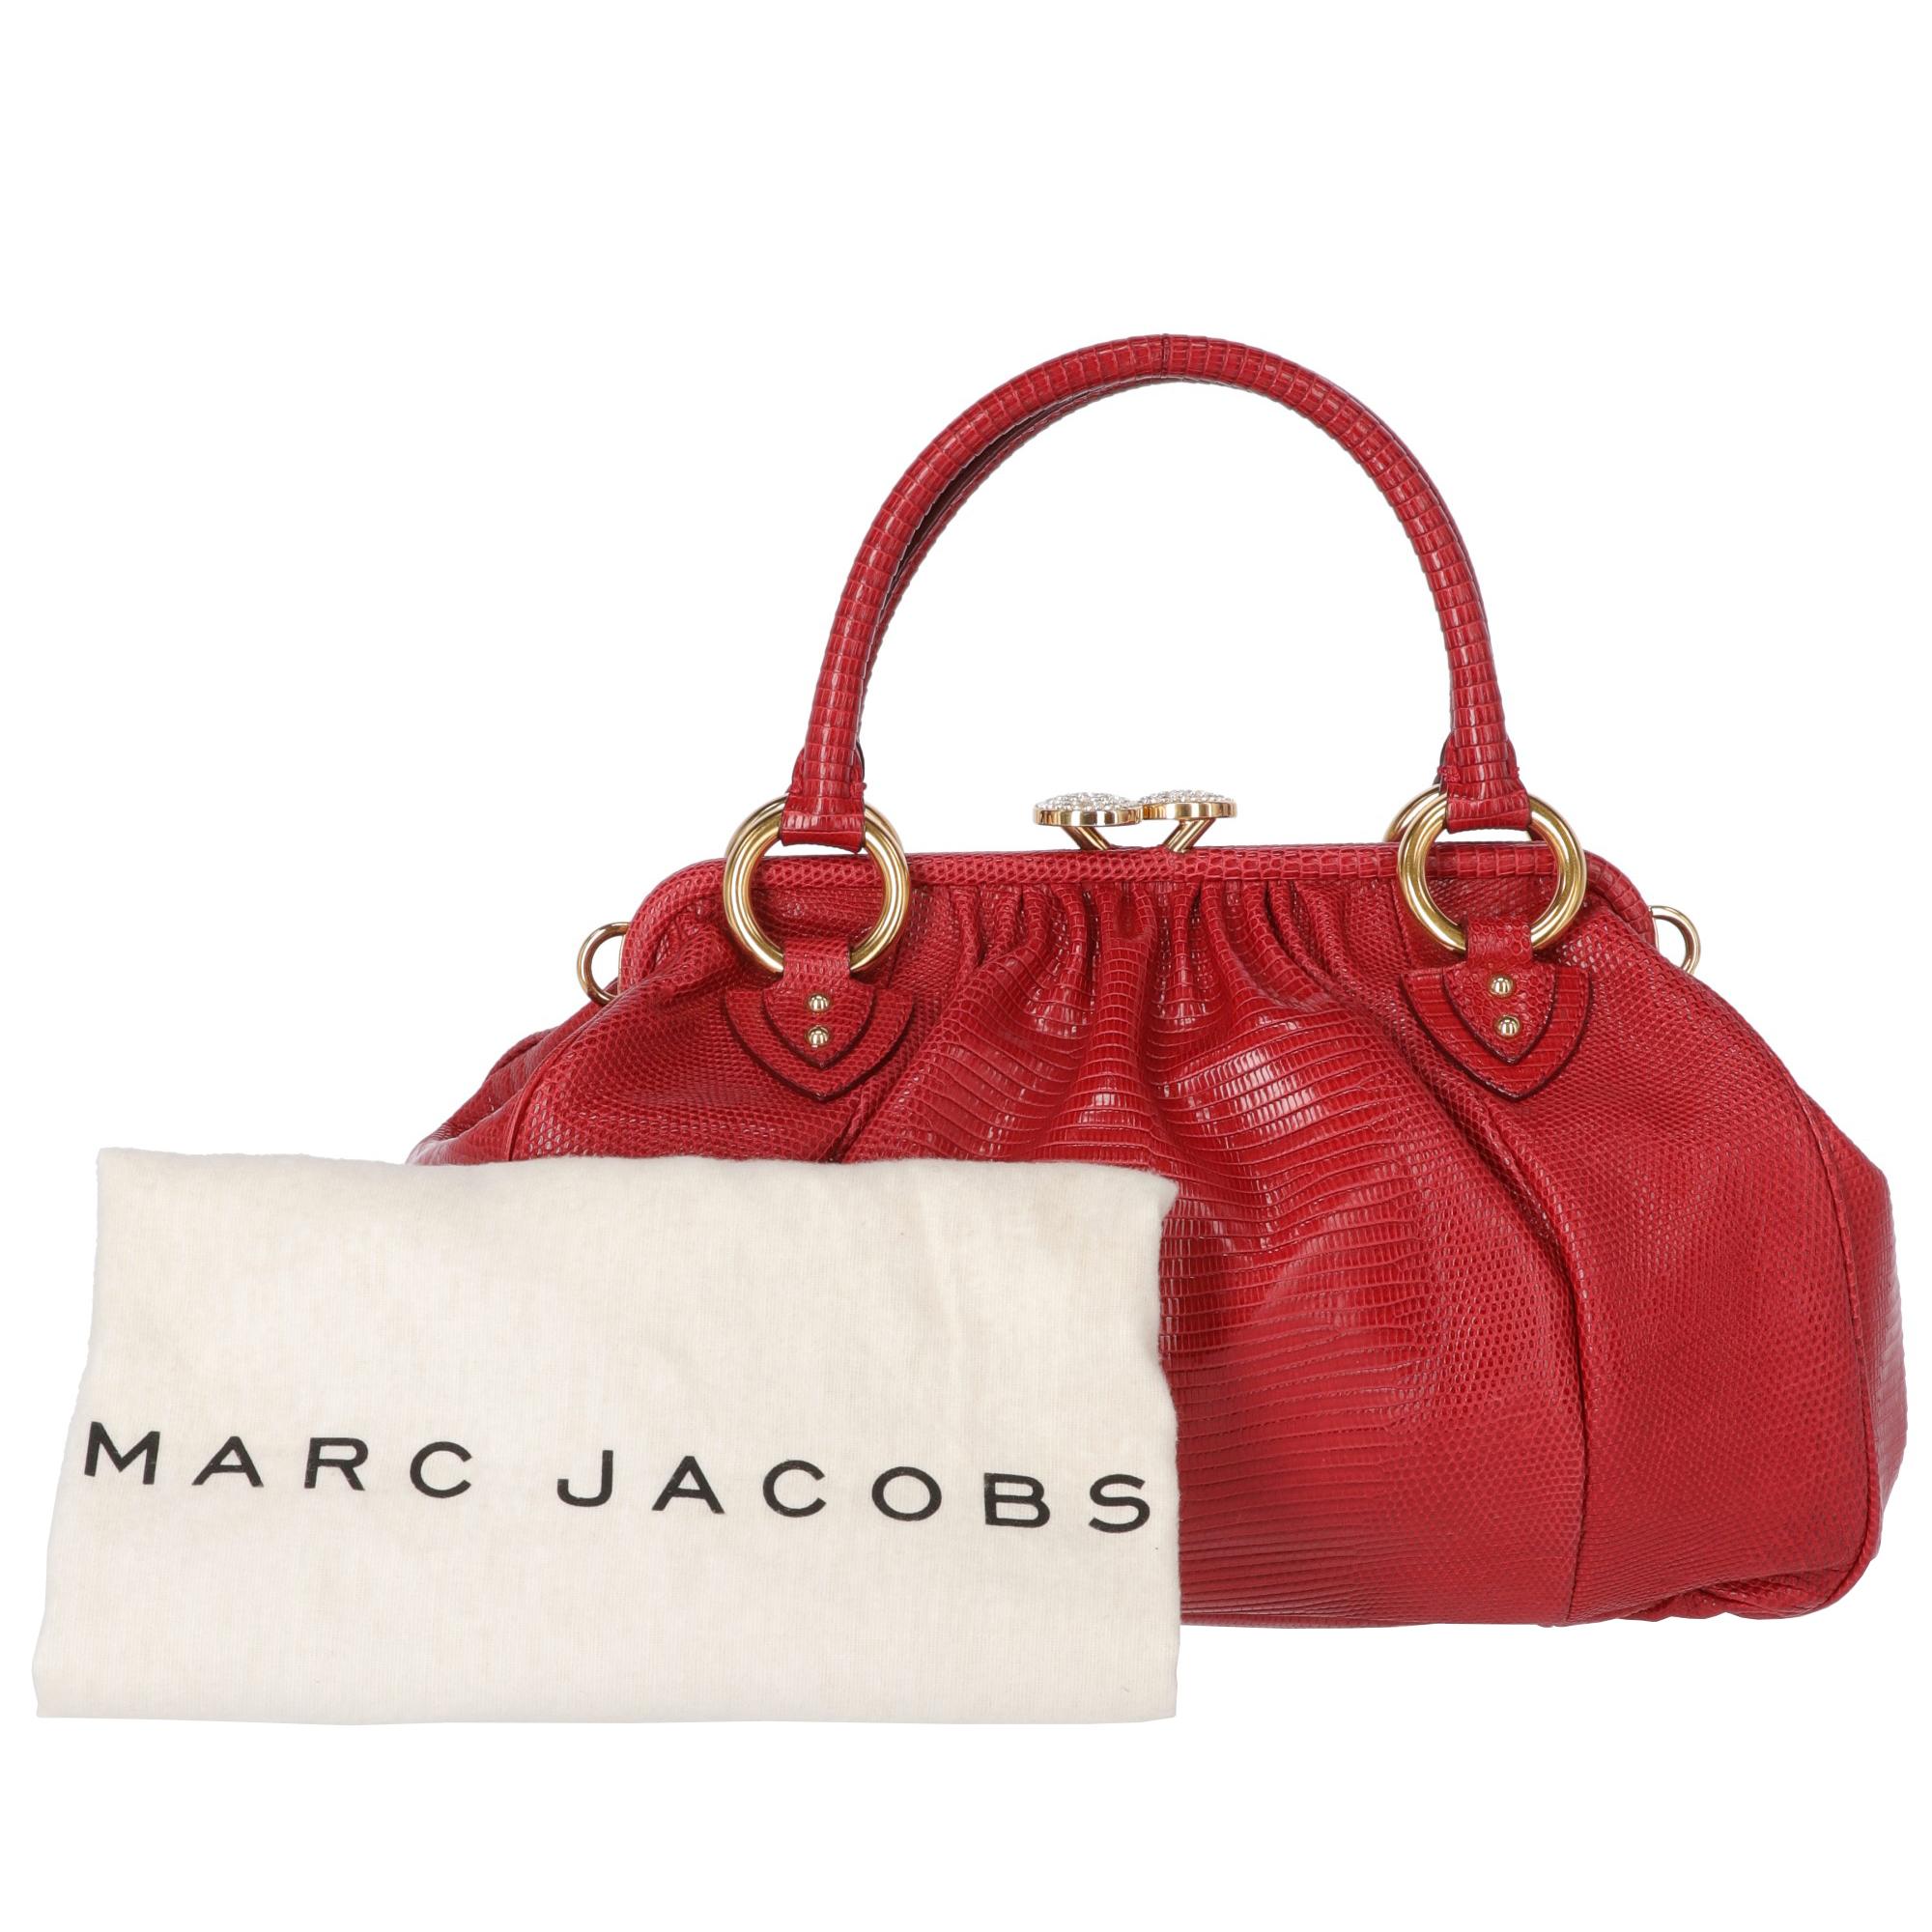 Marc Jacobs red tejus lizard handbag with two handles and gold-tone metal buckles and shoulder strap loops. With rhinestone and golden metal clasp closure, the bag features a front zip pocket with precious zip puller in metal and crystals. The